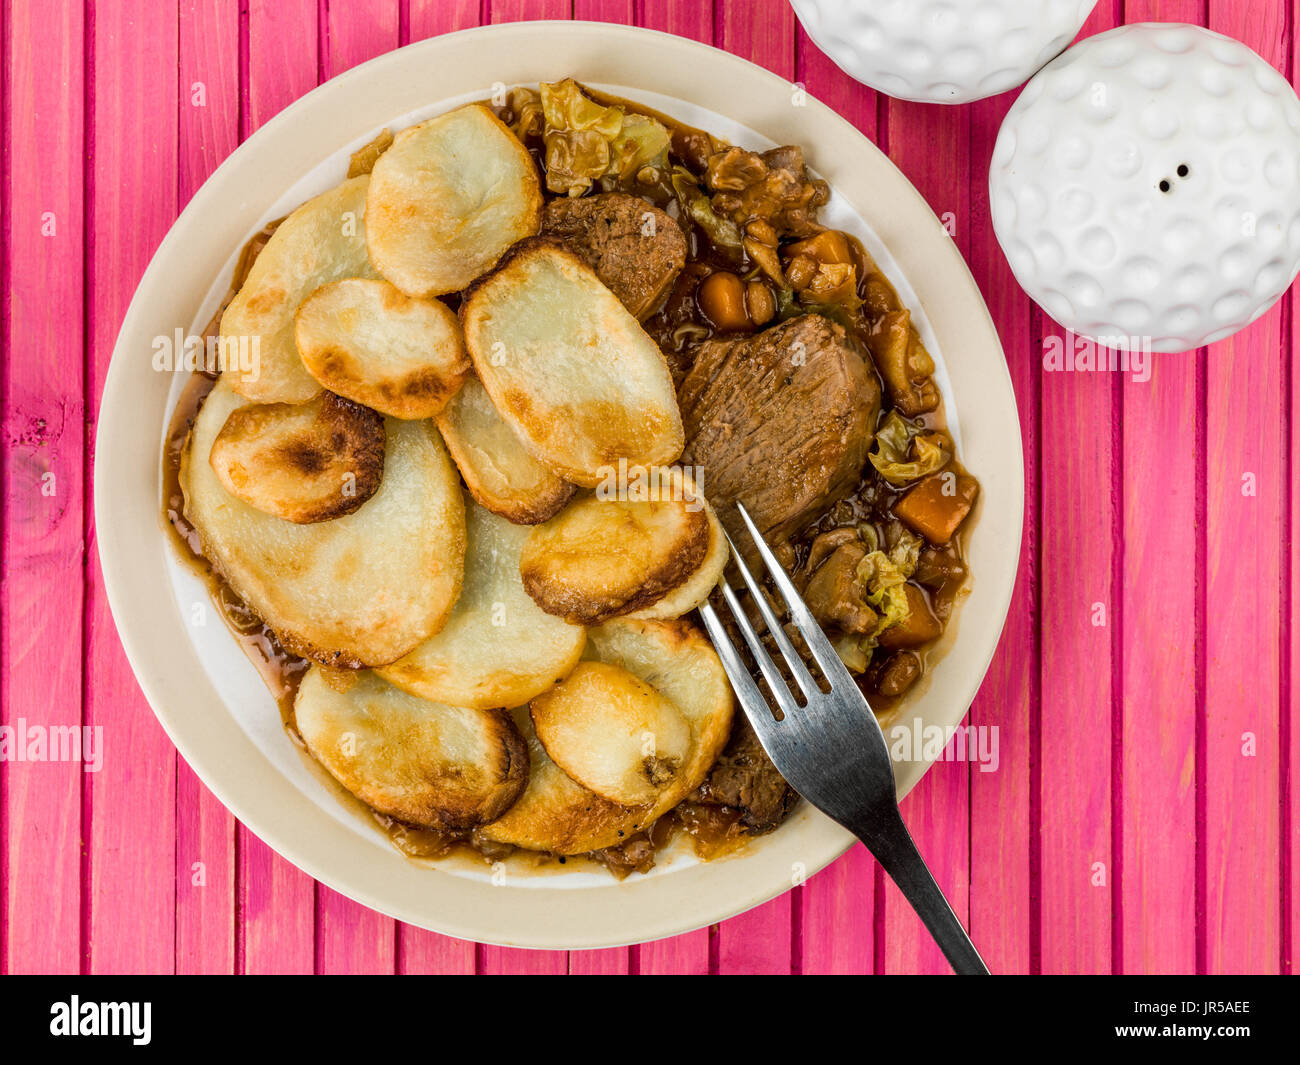 Lamb Hotpot With Sliced Potatoes and Onion Gravy Against a Pink Wooden Background Stock Photo